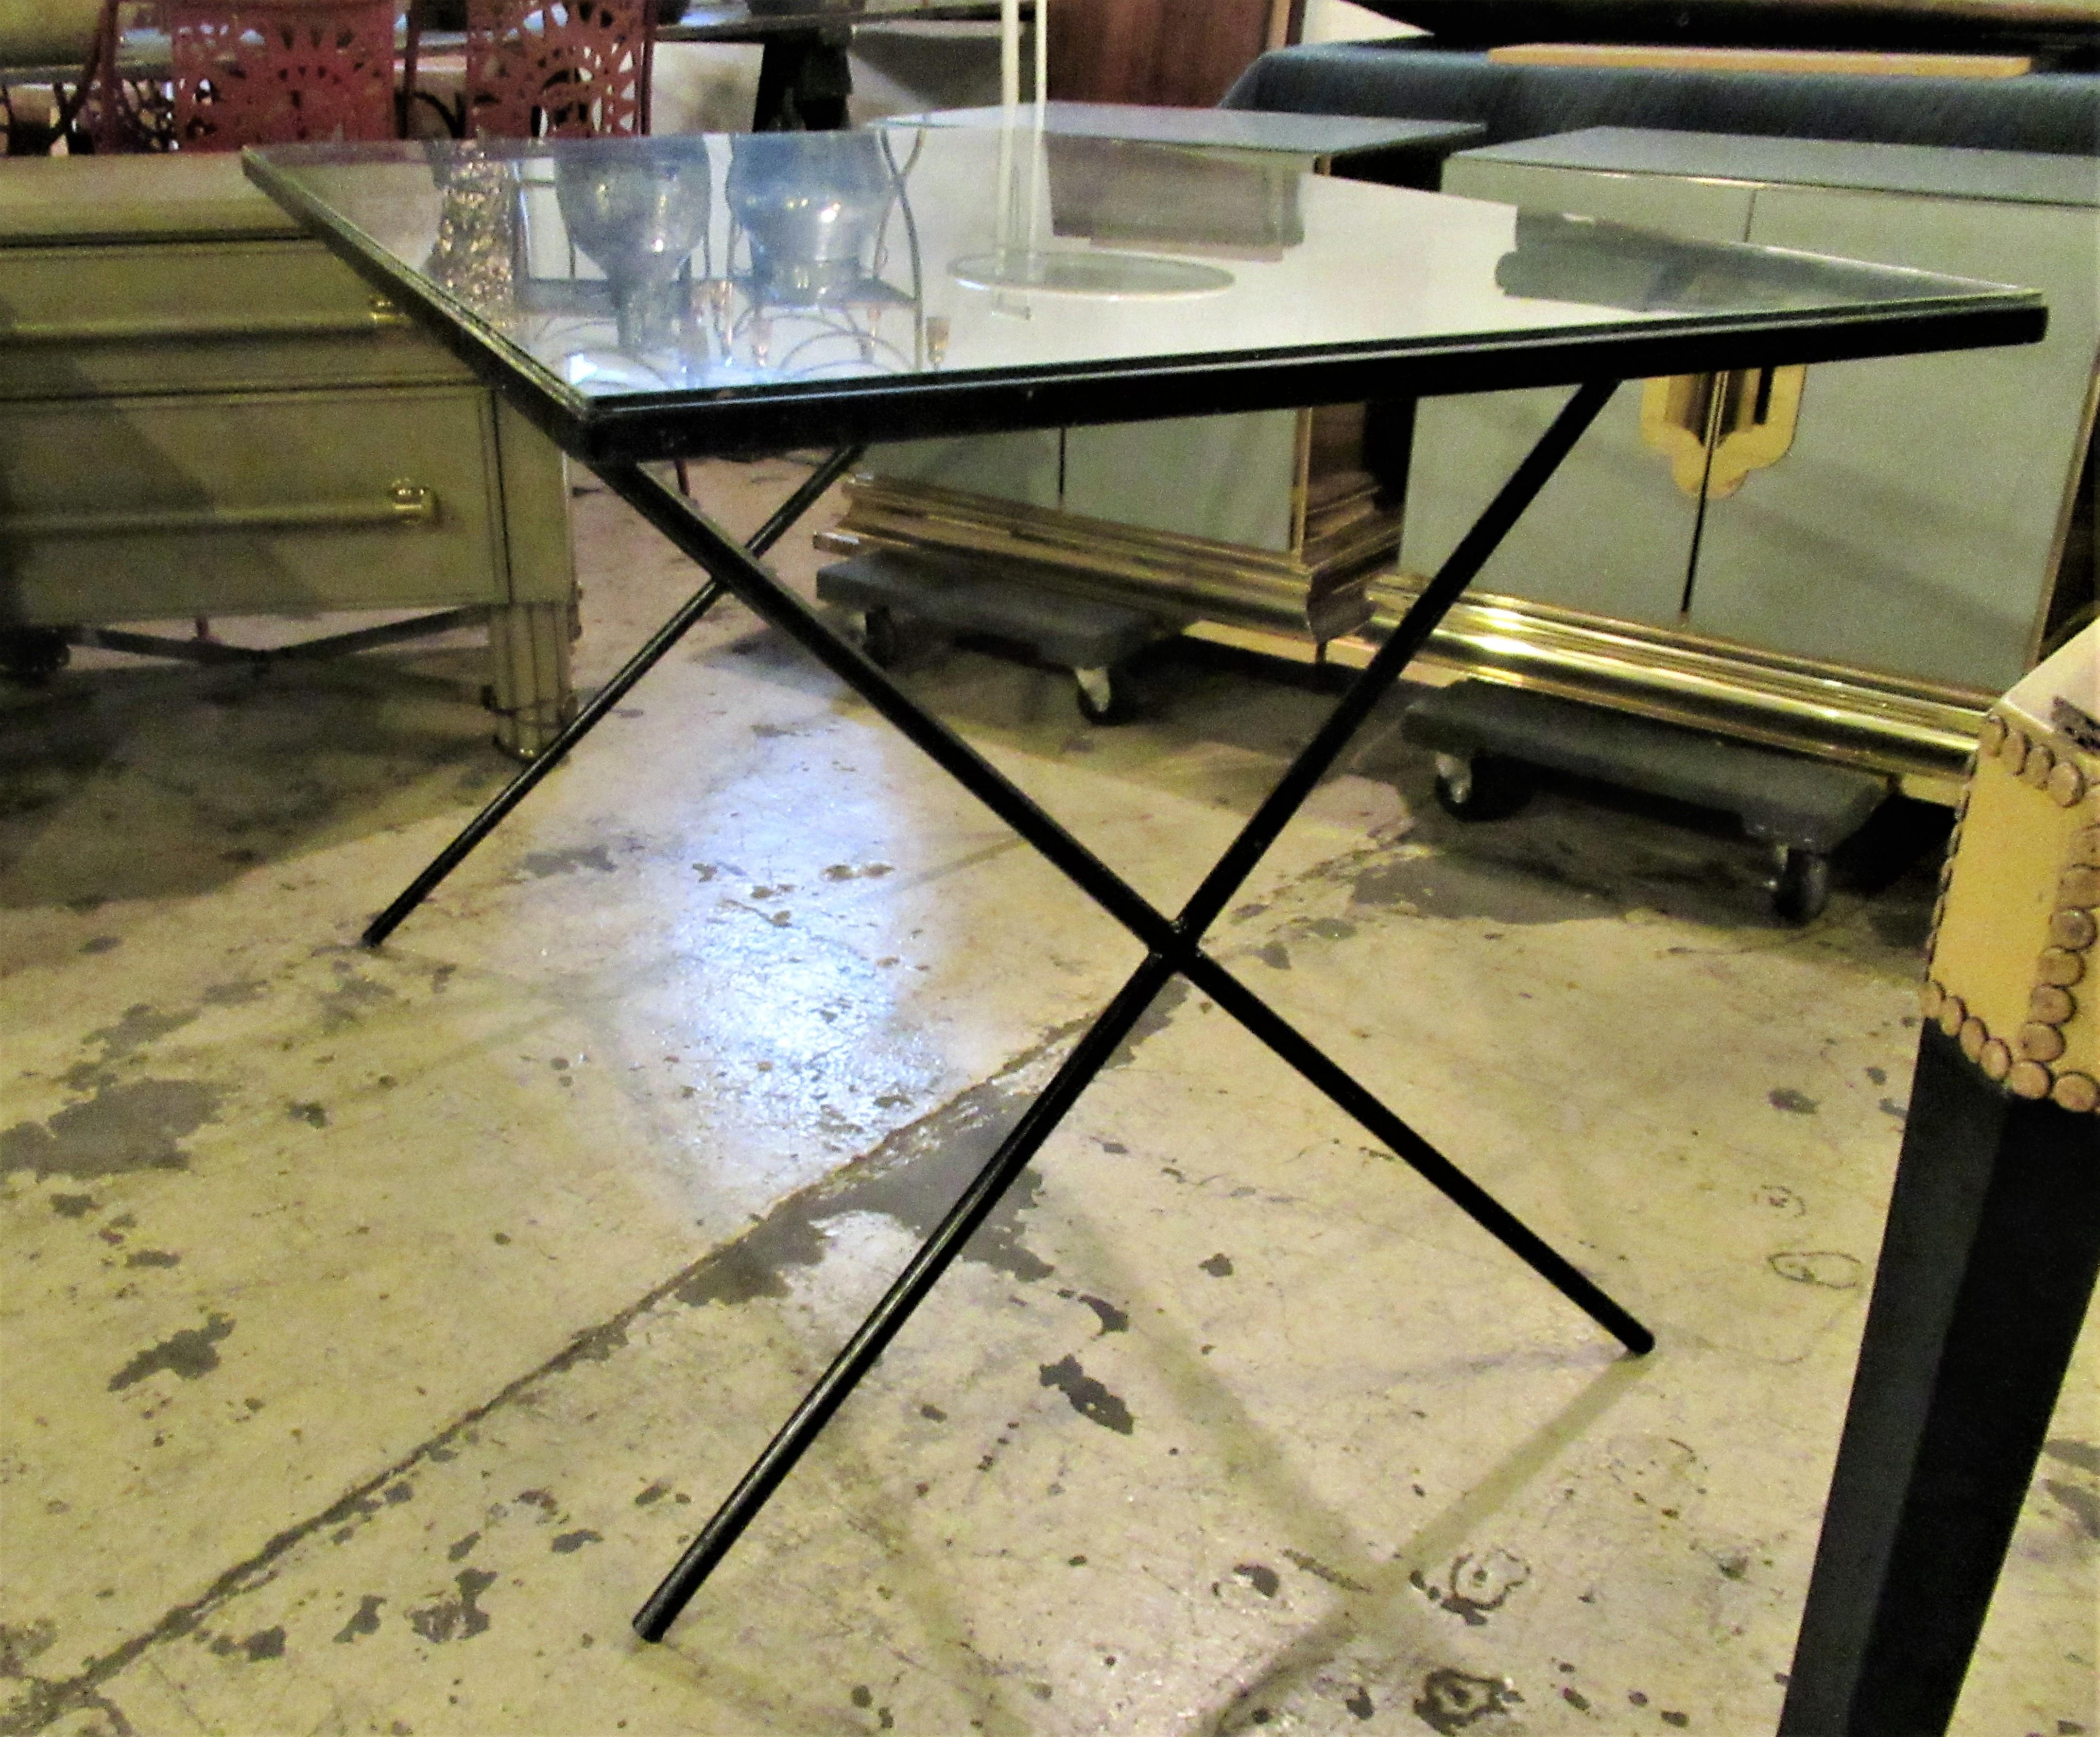  Architectural Modernist Iron Table by Muriel Coleman 7